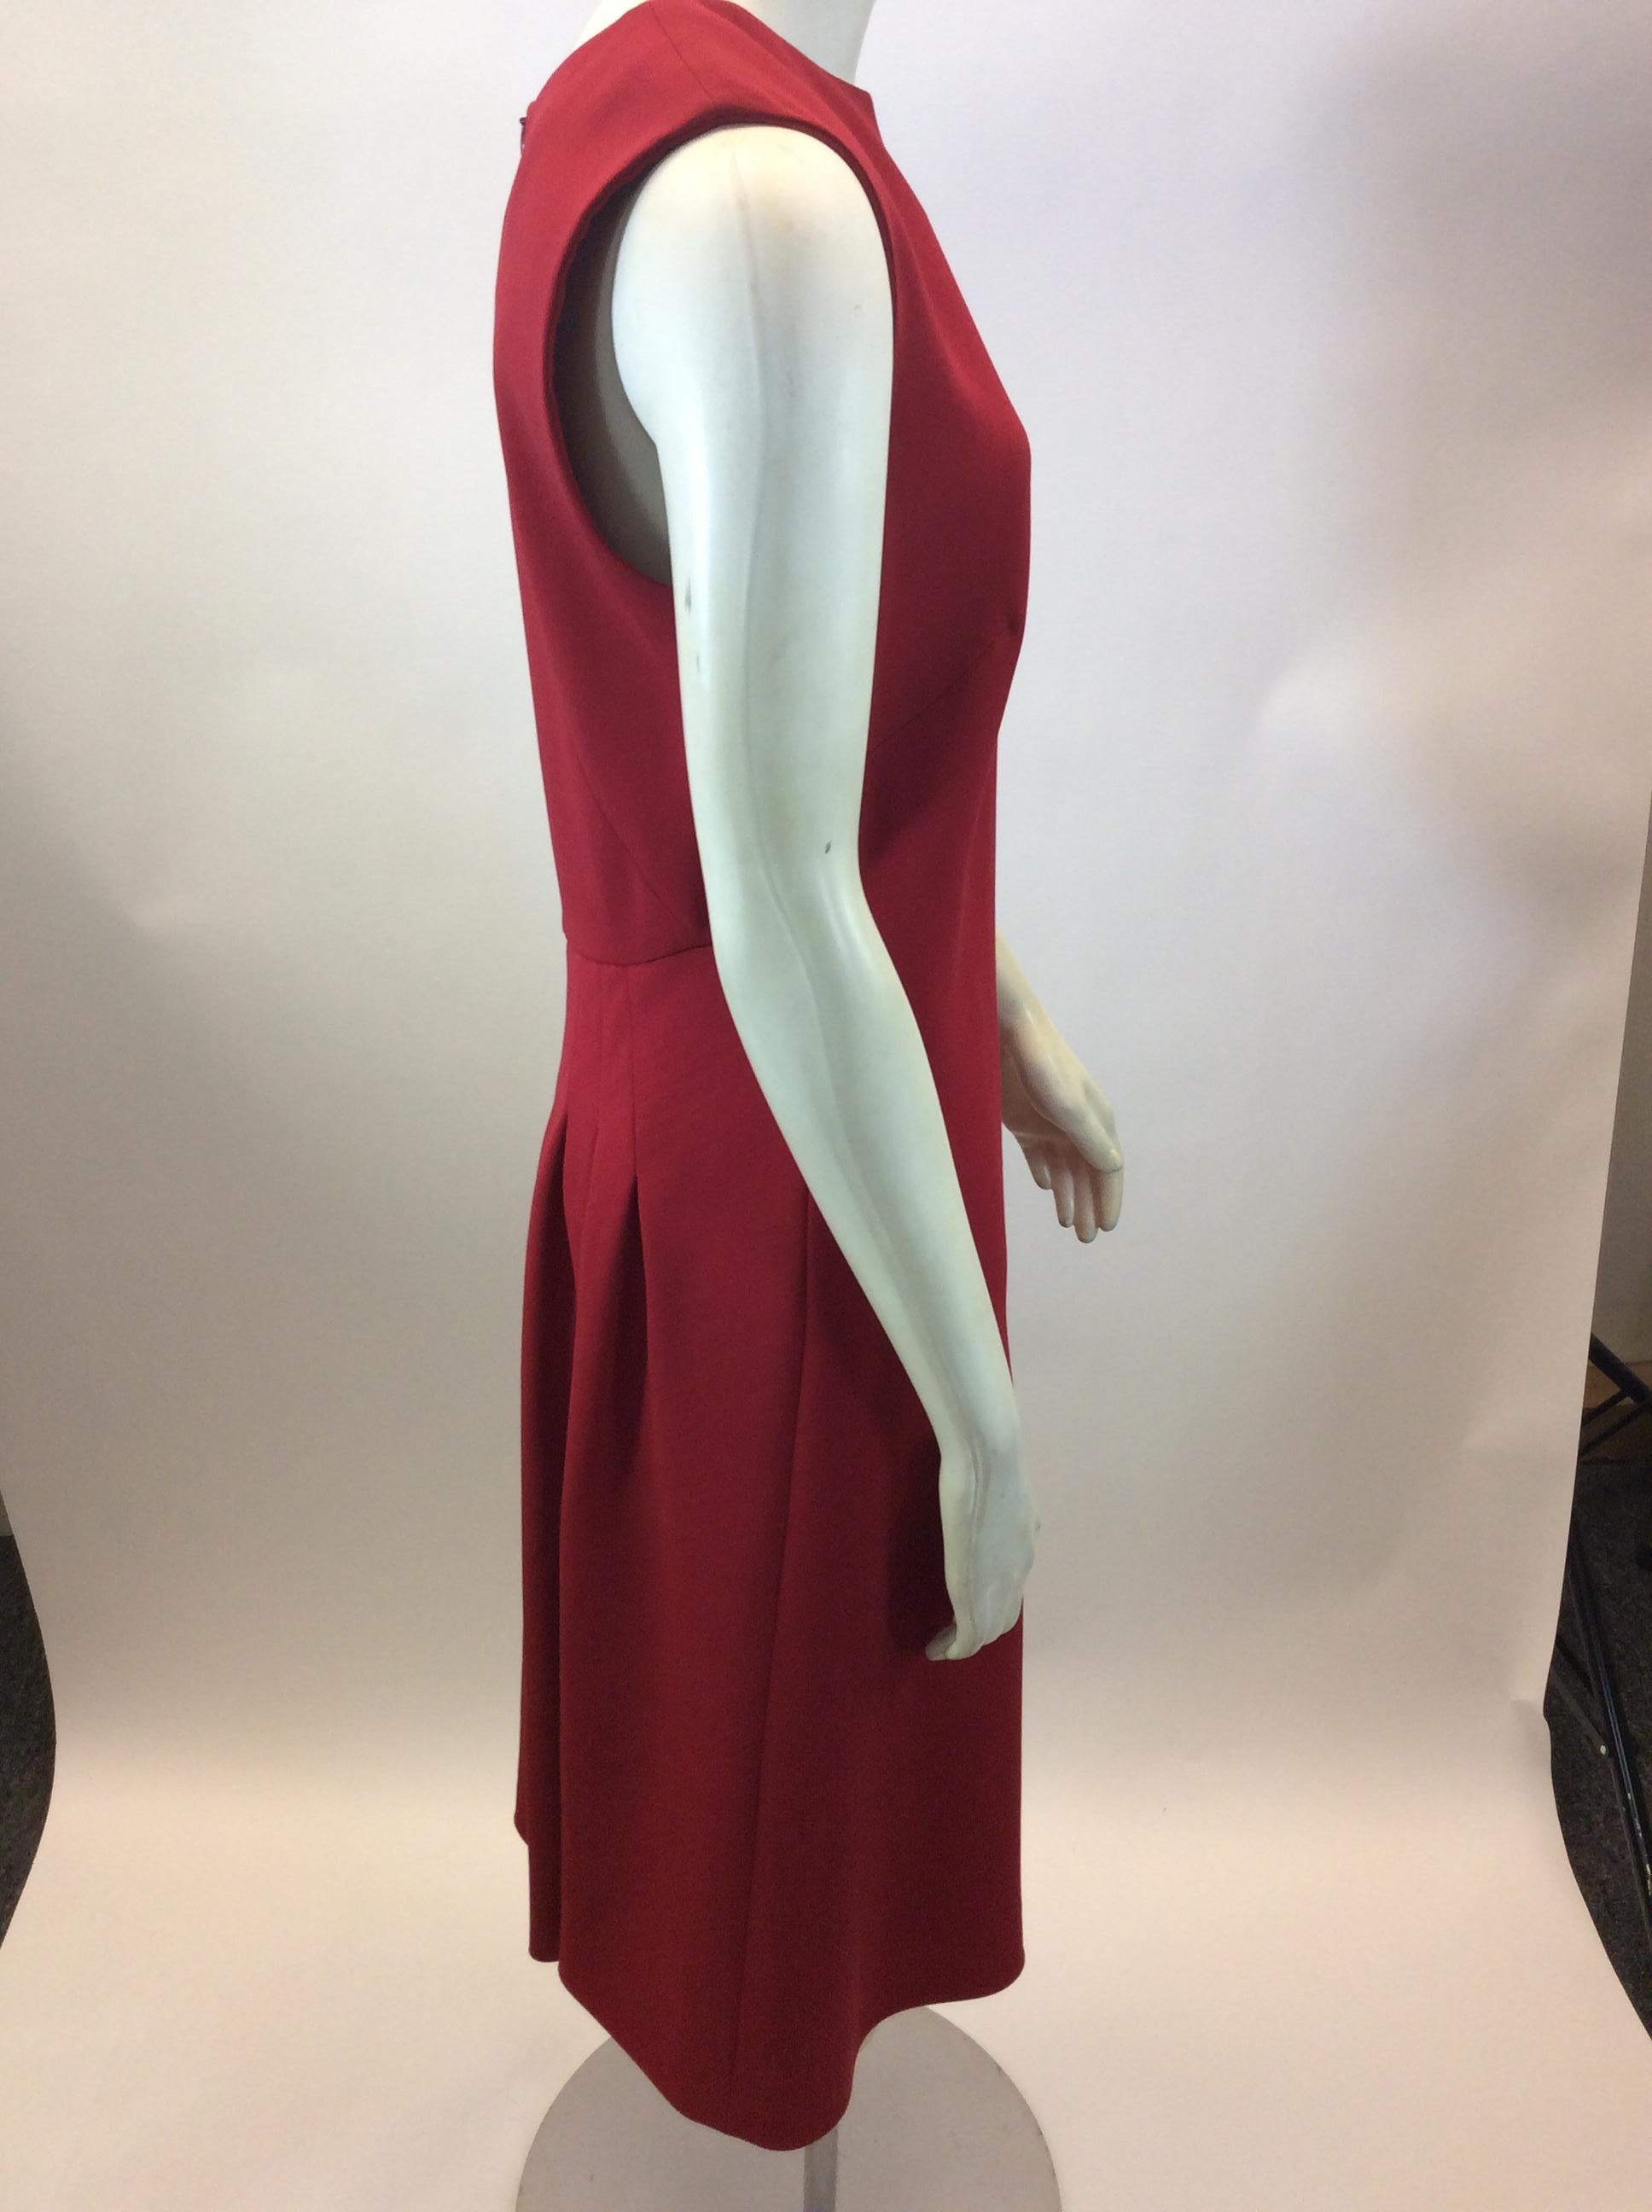 Giorgio Armani Red Wool Dress NWT In New Condition For Sale In Narberth, PA